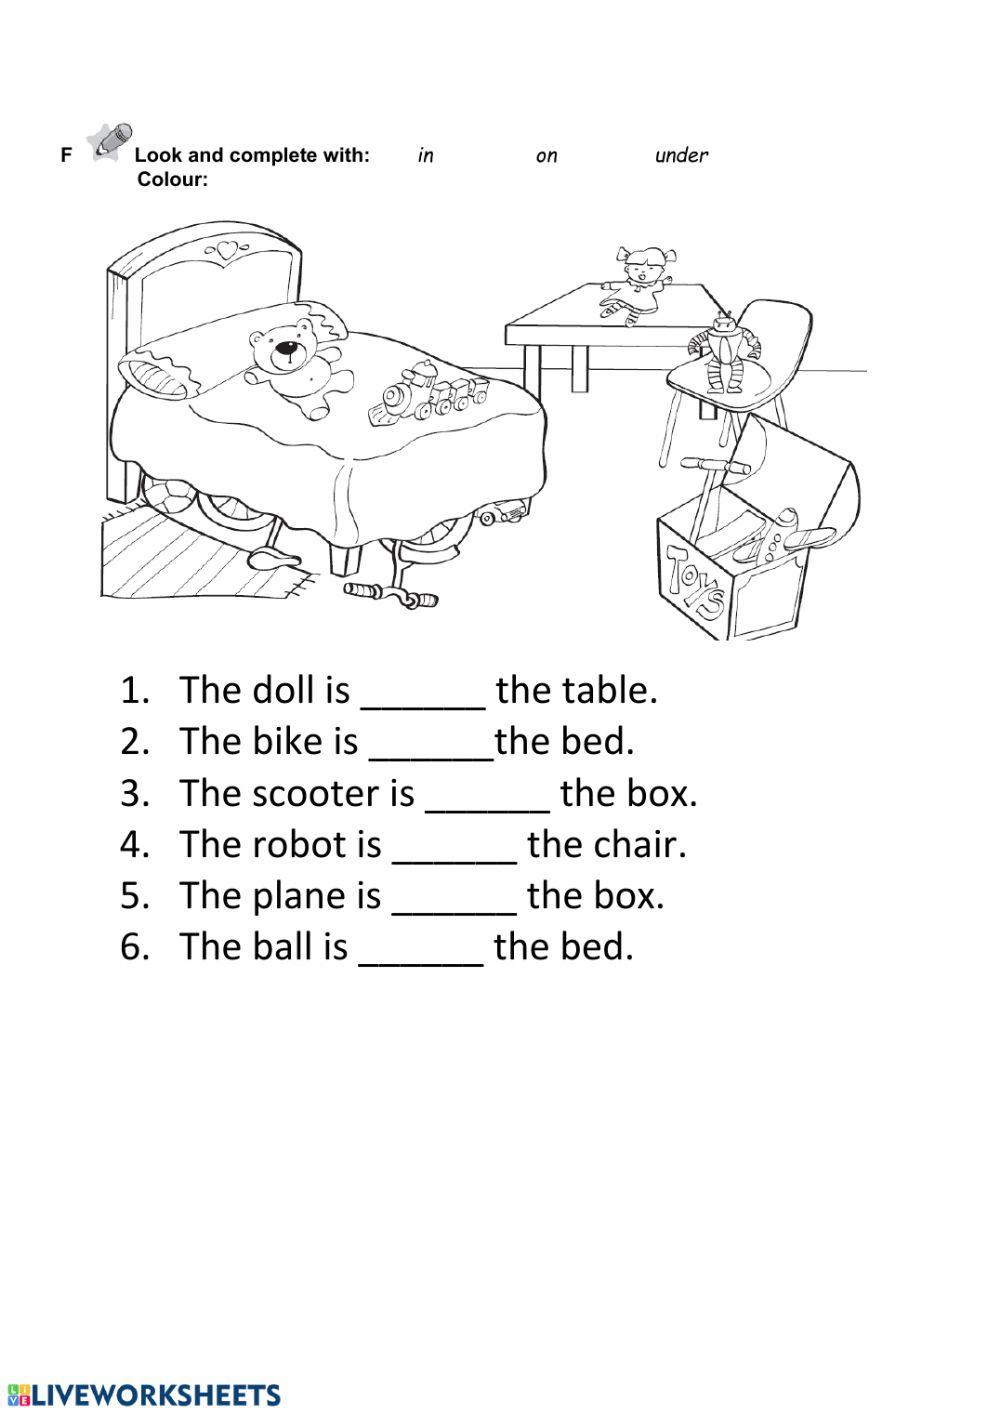 Routines, toys and prepositions test